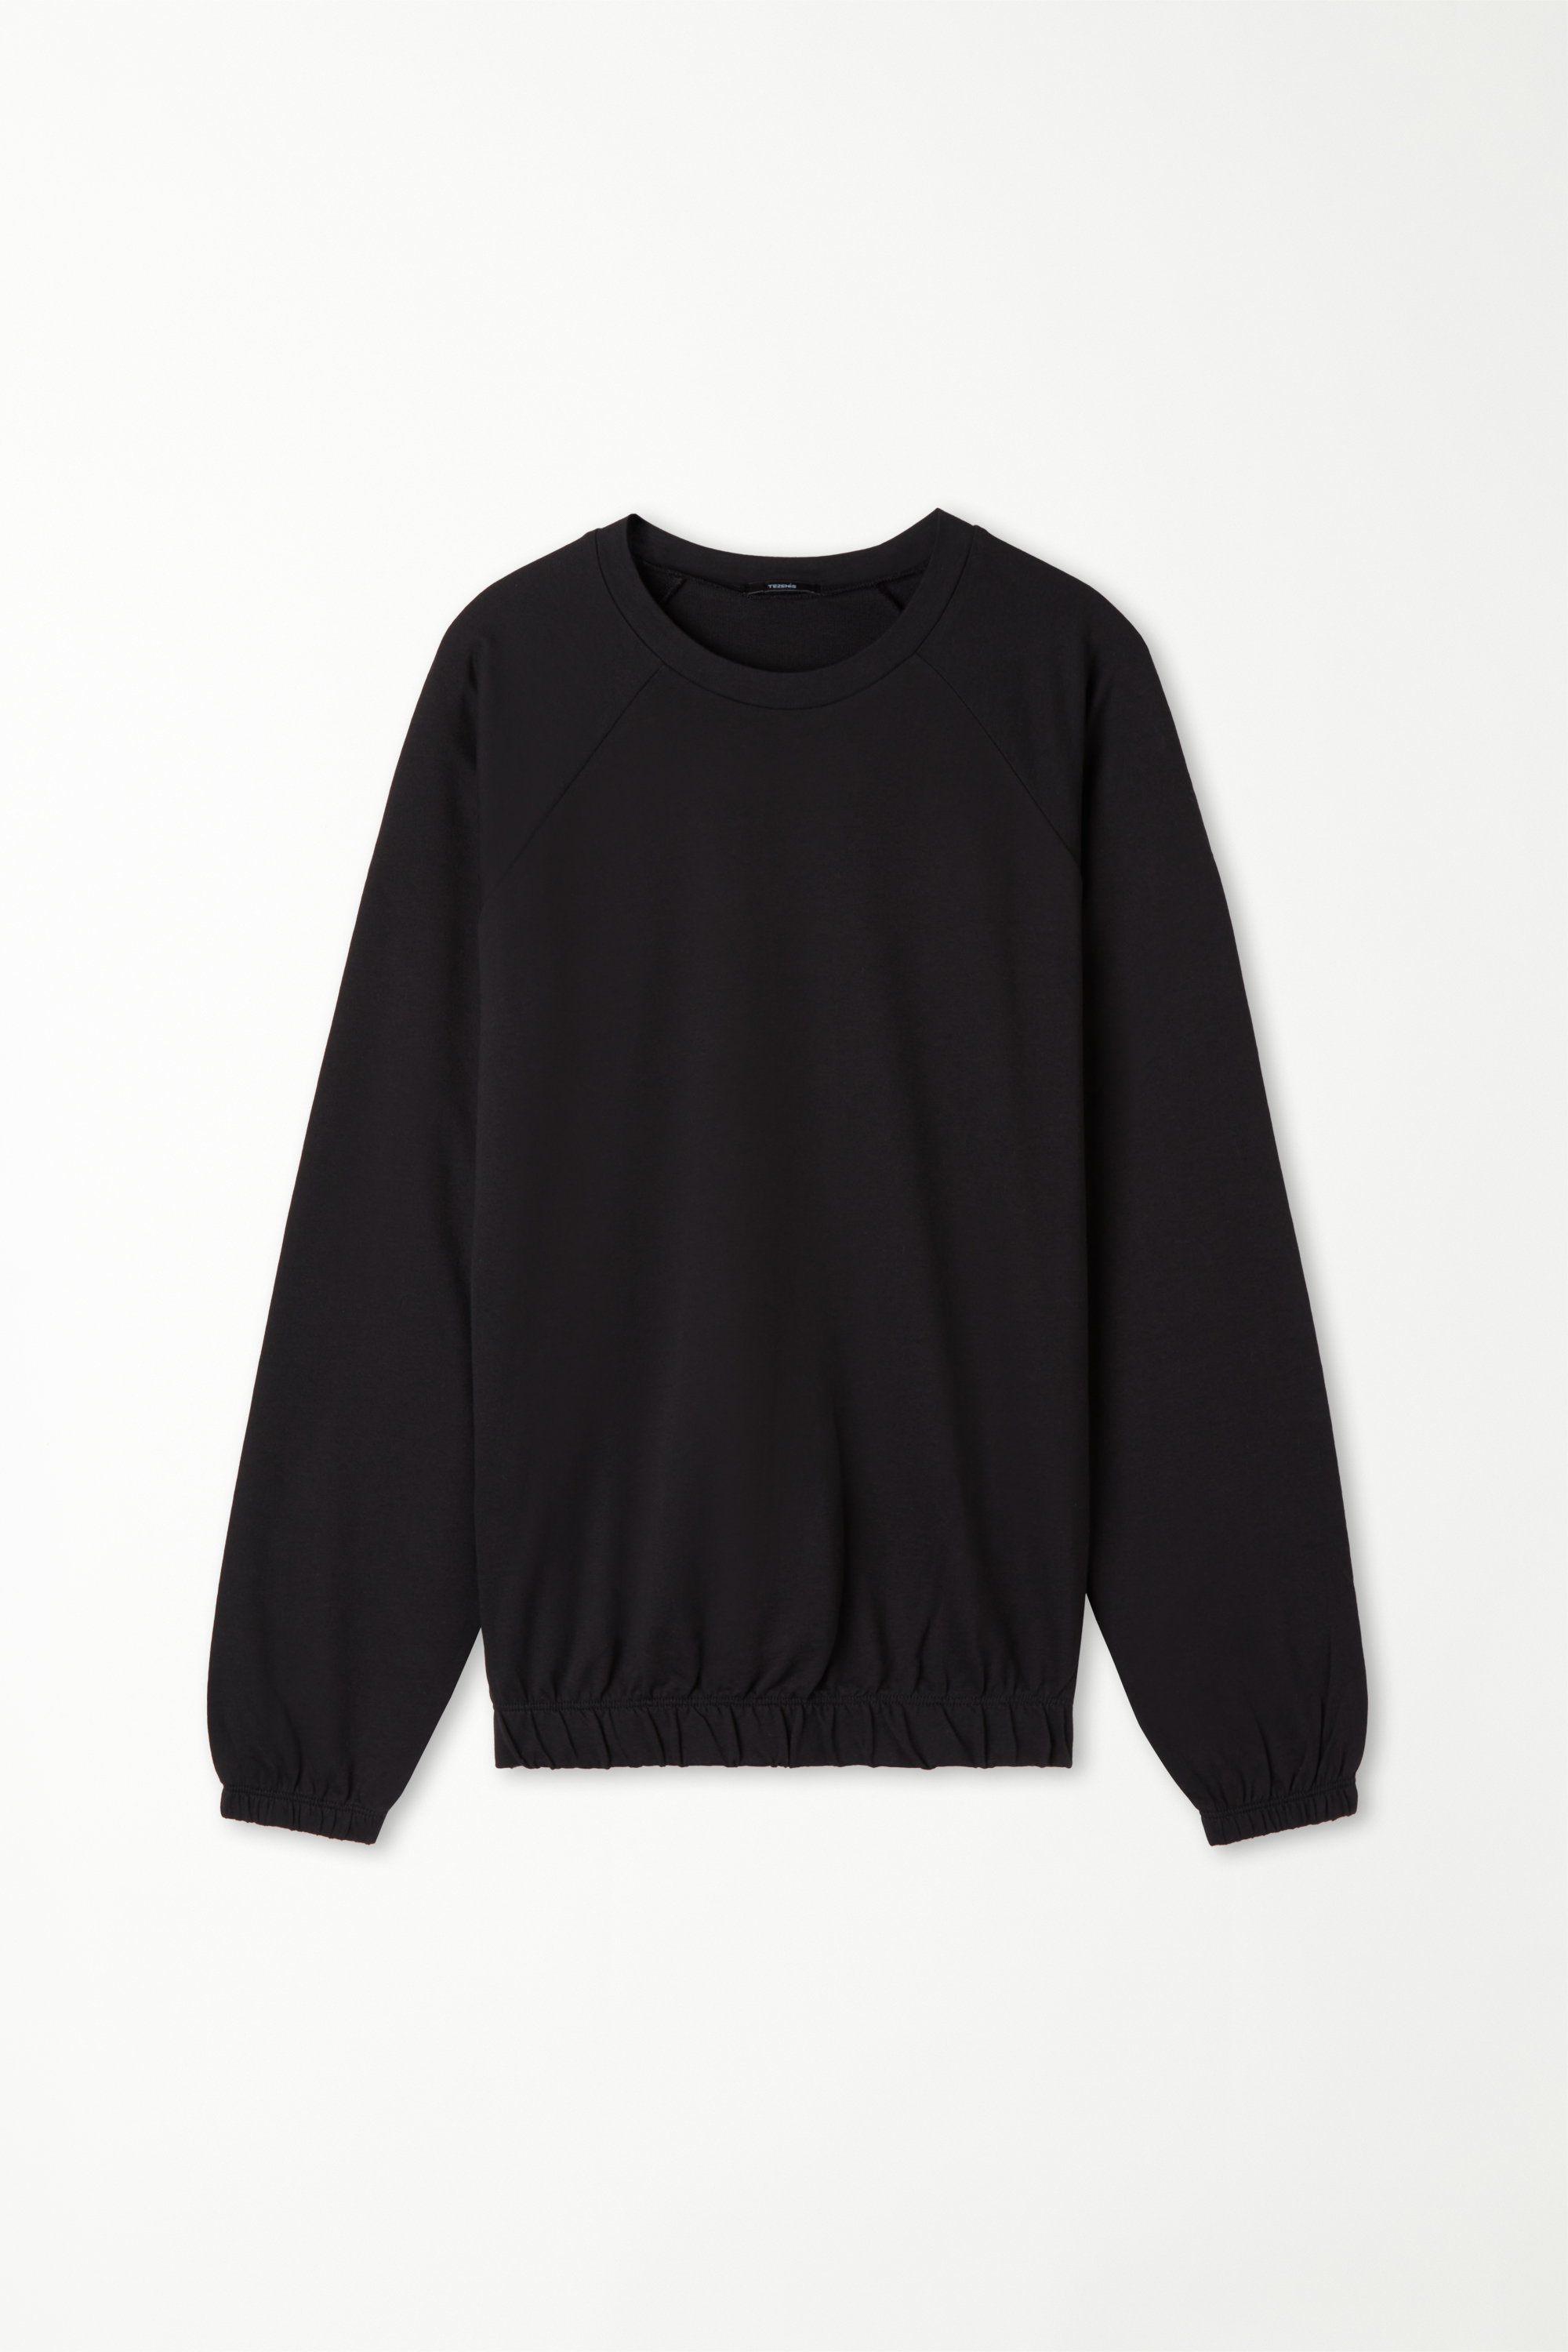 Long-Sleeved Crew-Neck Knit Top with Cuffs